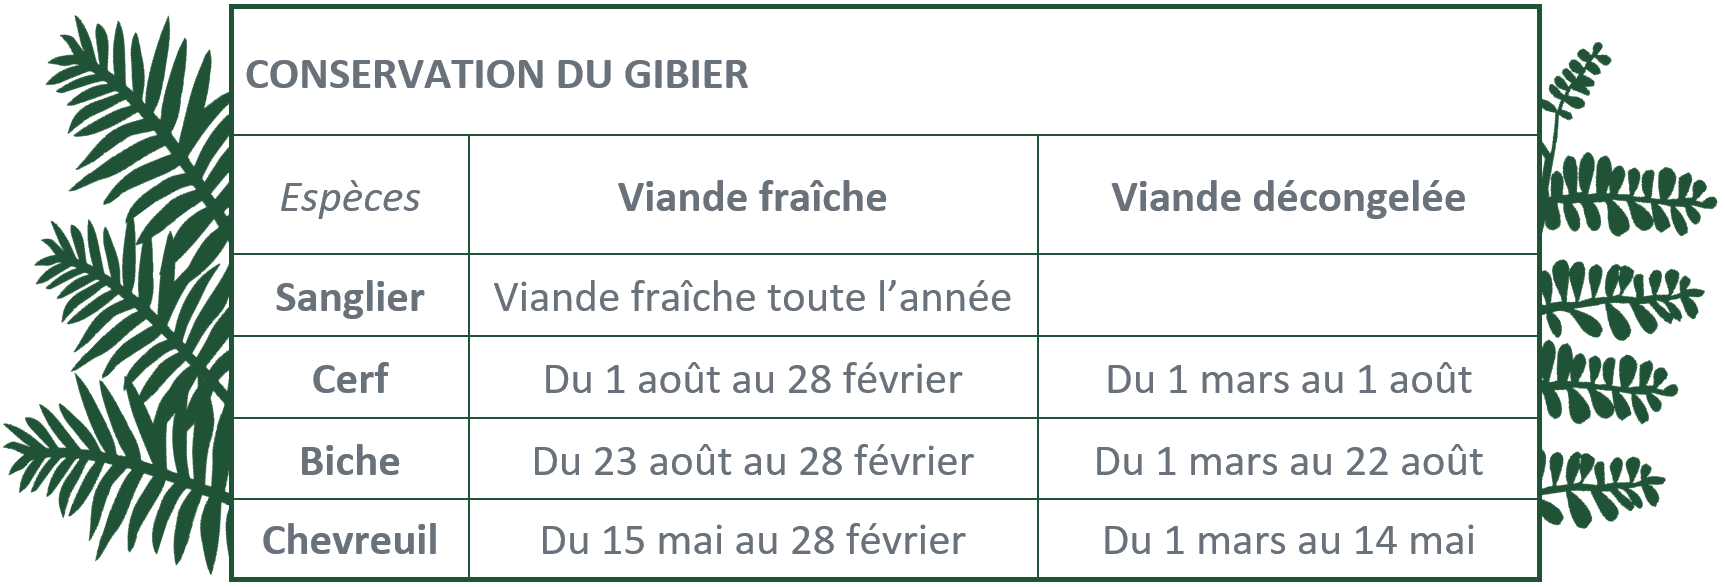 conservation gibier